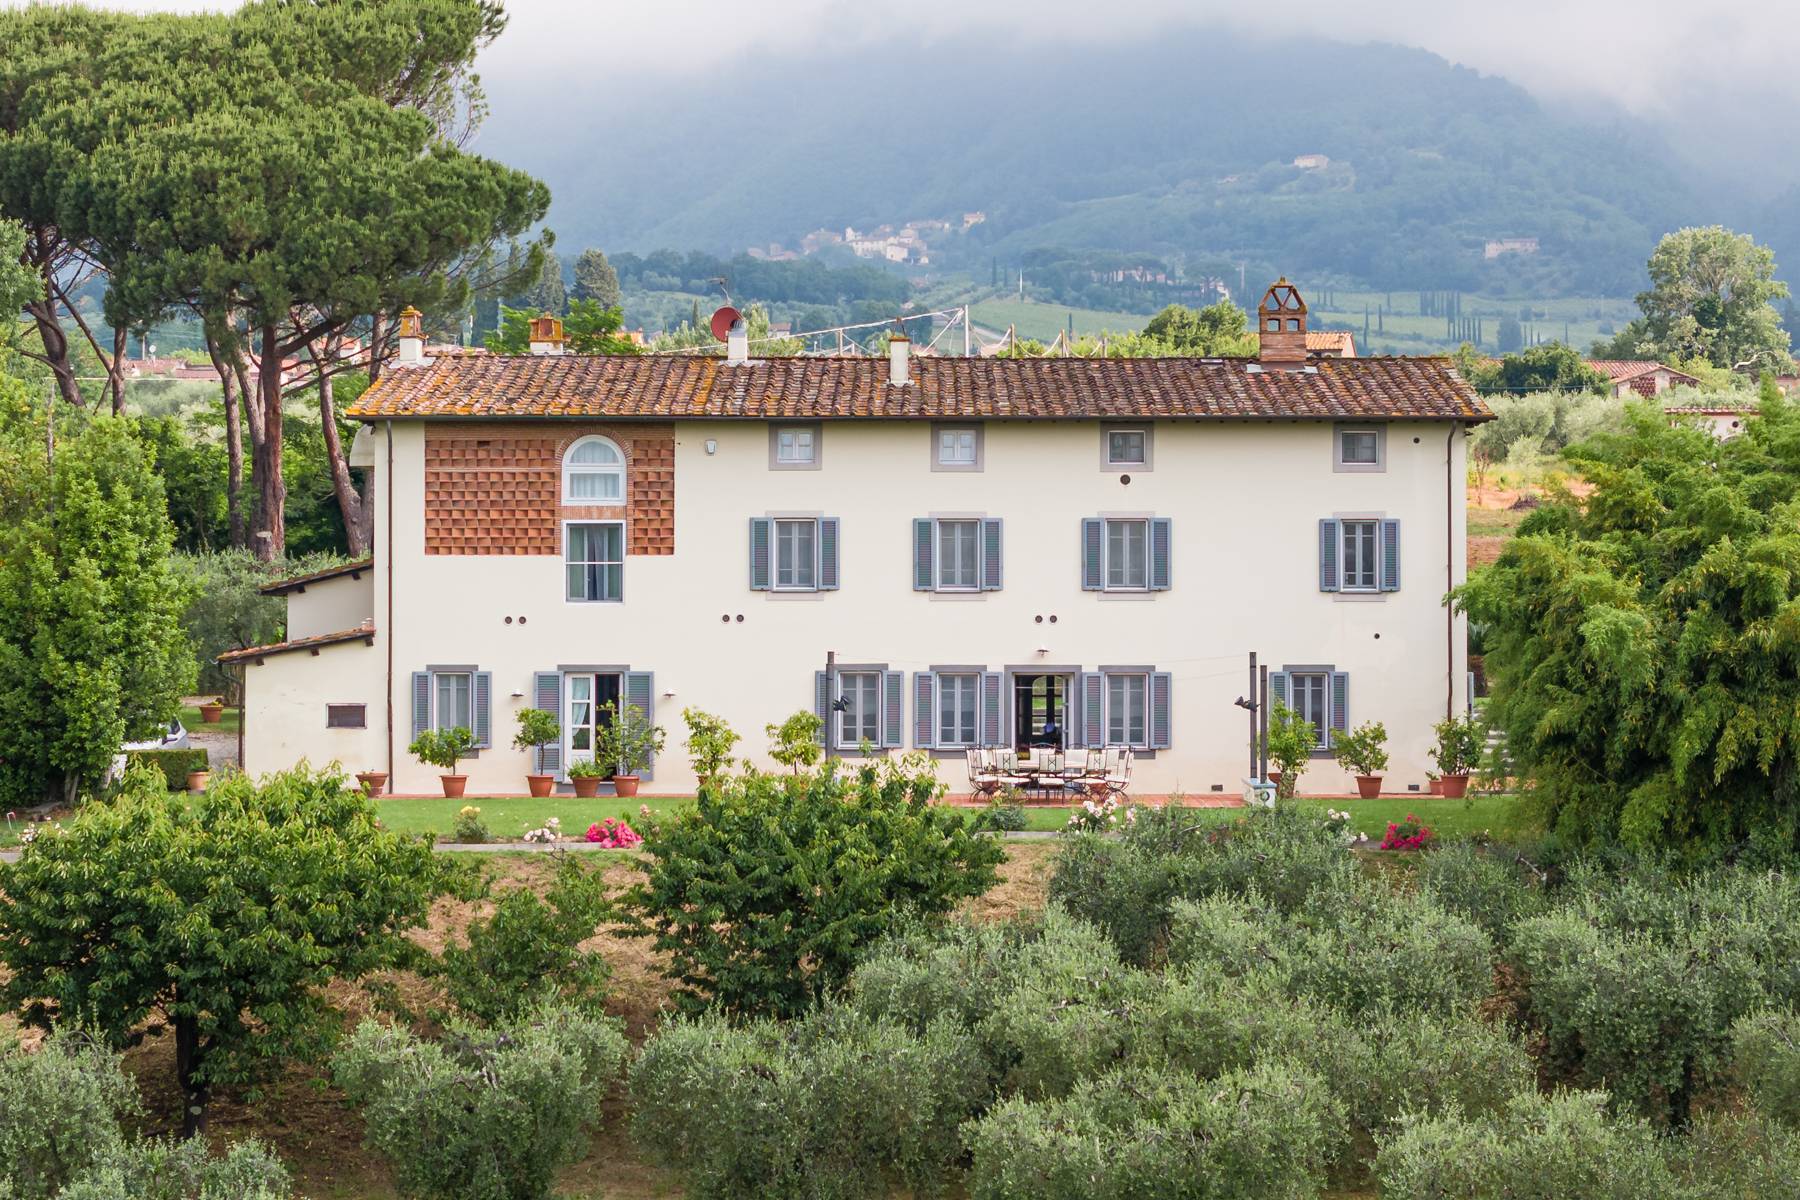 Charming Villa a few km from Lucca